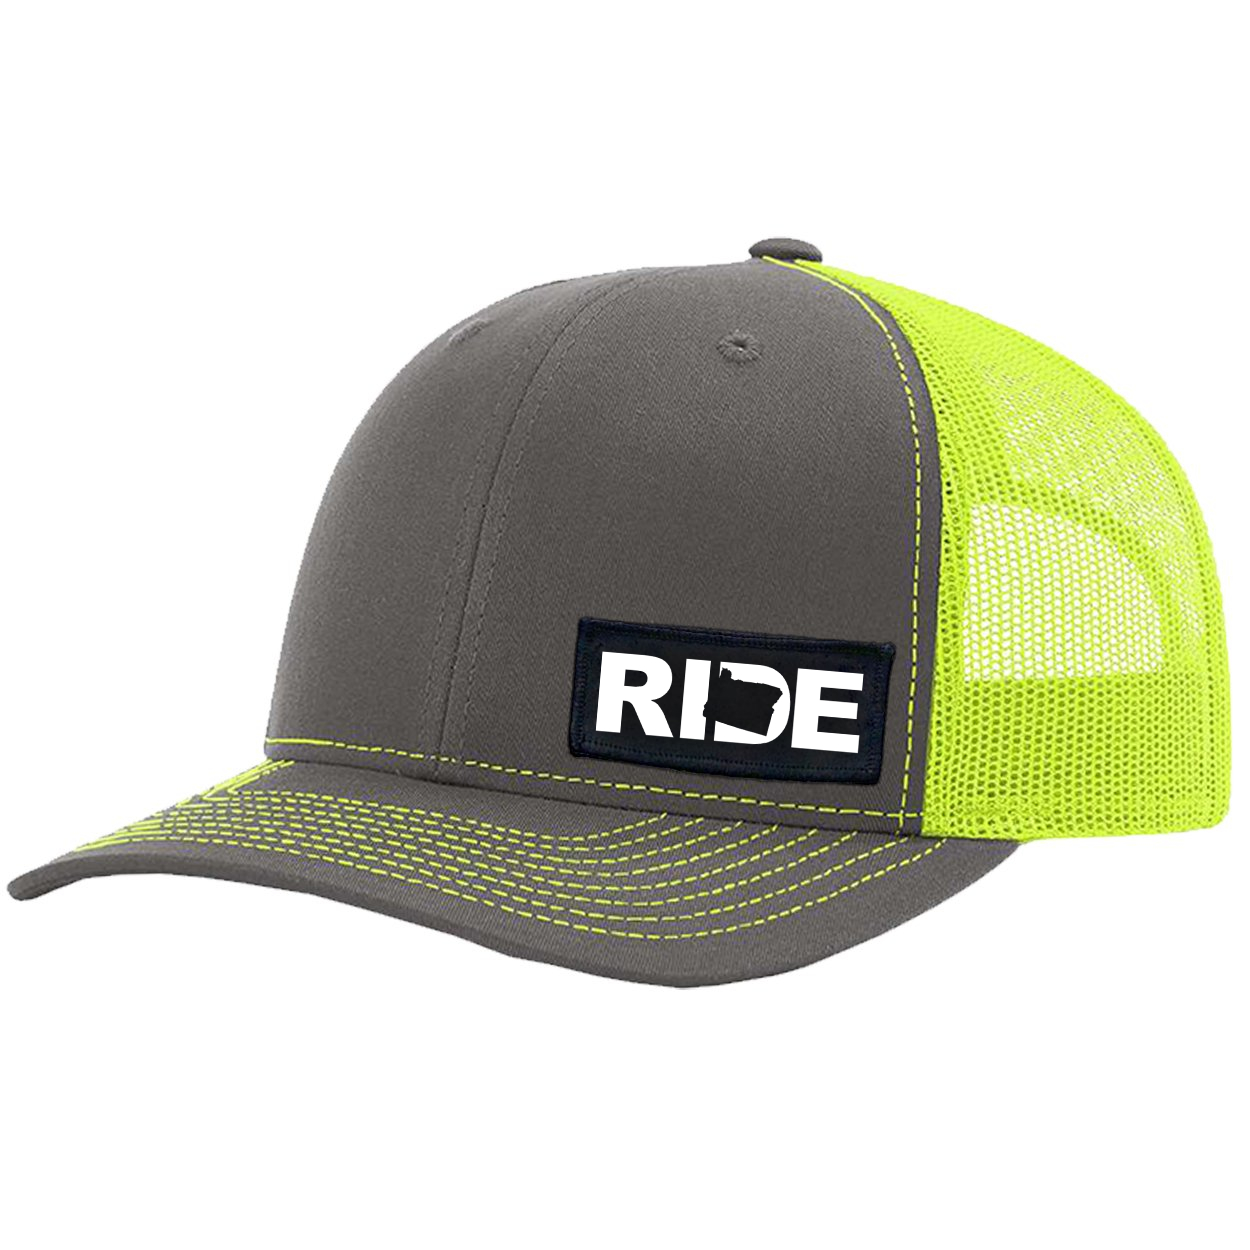 Ride Oregon Night Out Woven Patch Snapback Trucker Hat Charcoal/Neon Yellow (White Logo)